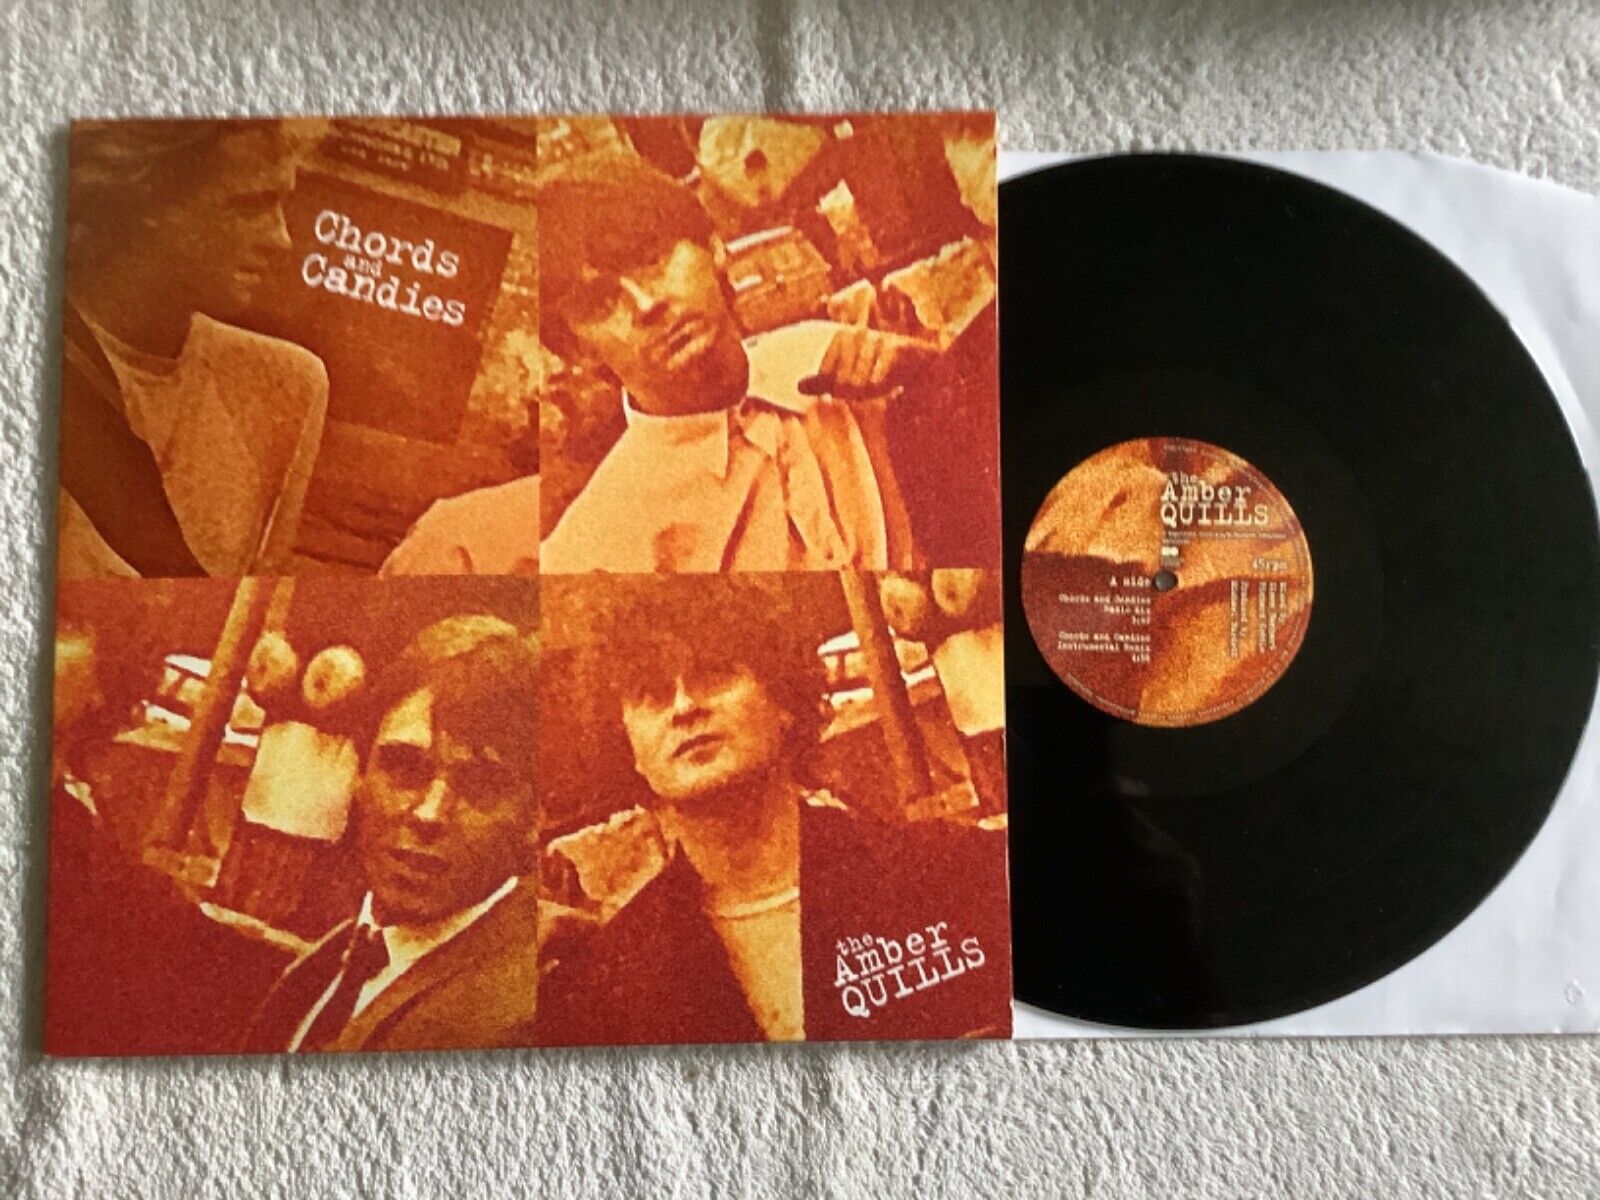 THE AMBER QUILLS - Chords and Candies 12" Hidden Copy 2022 Indie Rock